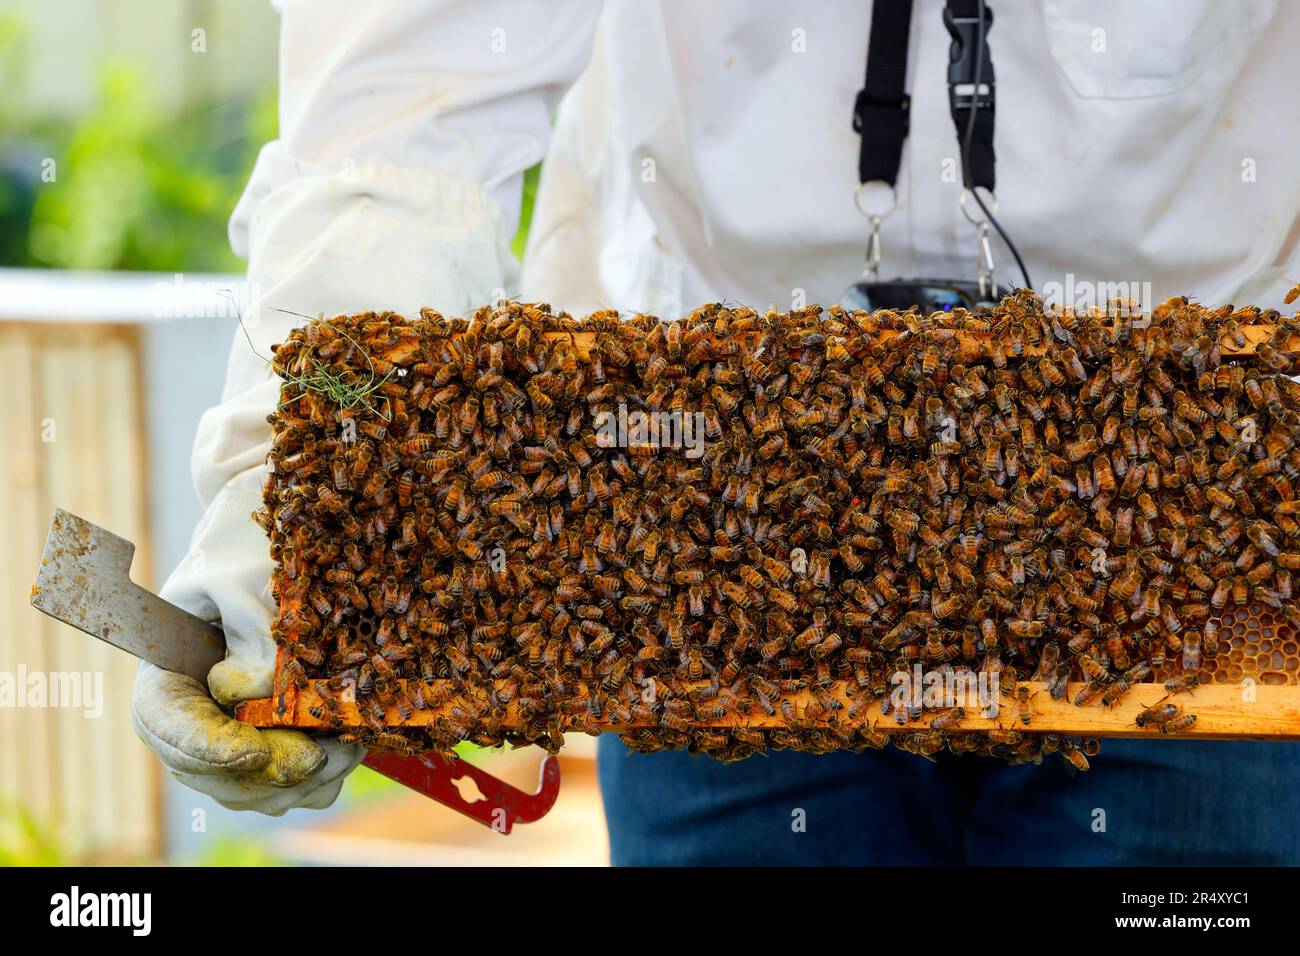 A beekeeper with a J hook hive tool holds a brood comb full of honeybees with the red dot marked queen bee in the middle of the comb. Stock Photo